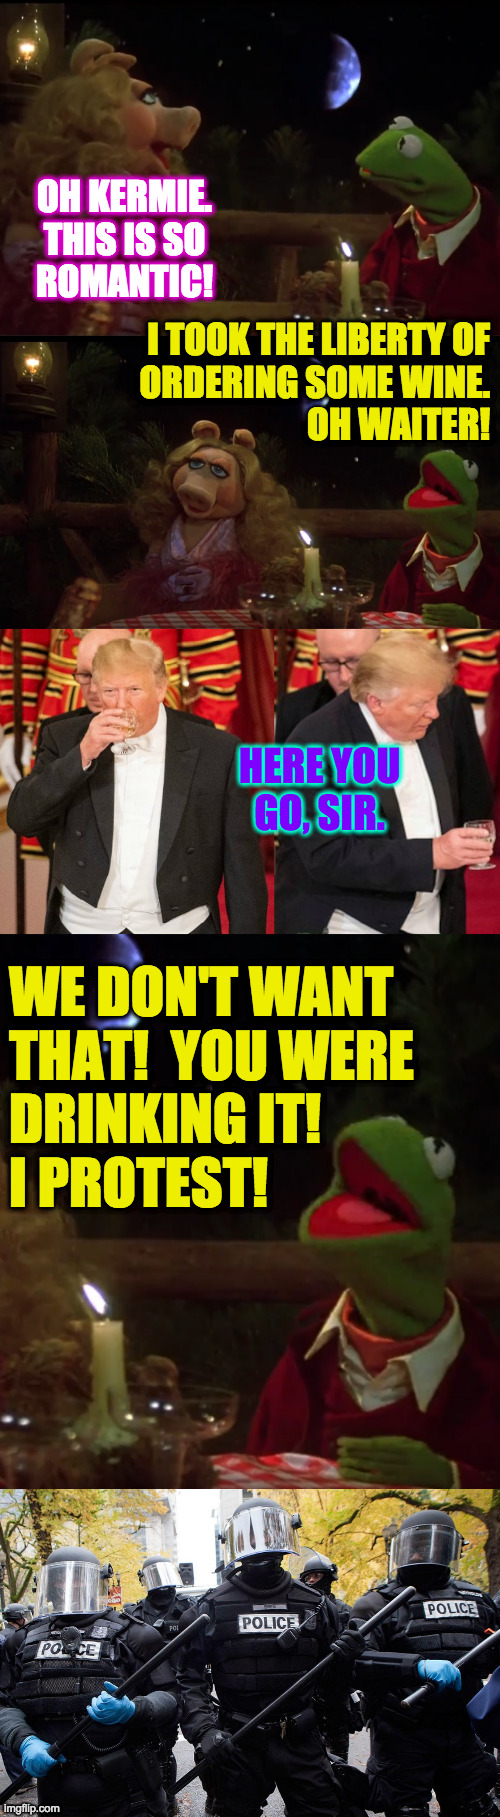 He'll never be invited to work with the Muppets. | OH KERMIE.
THIS IS SO
ROMANTIC! I TOOK THE LIBERTY OF
ORDERING SOME WINE.
OH WAITER! HERE YOU
GO, SIR. WE DON'T WANT
THAT!  YOU WERE
DRINKING IT!
I PROTEST! | image tagged in memes,kermit and miss piggy,oh waiter,protest,riot,dominate | made w/ Imgflip meme maker